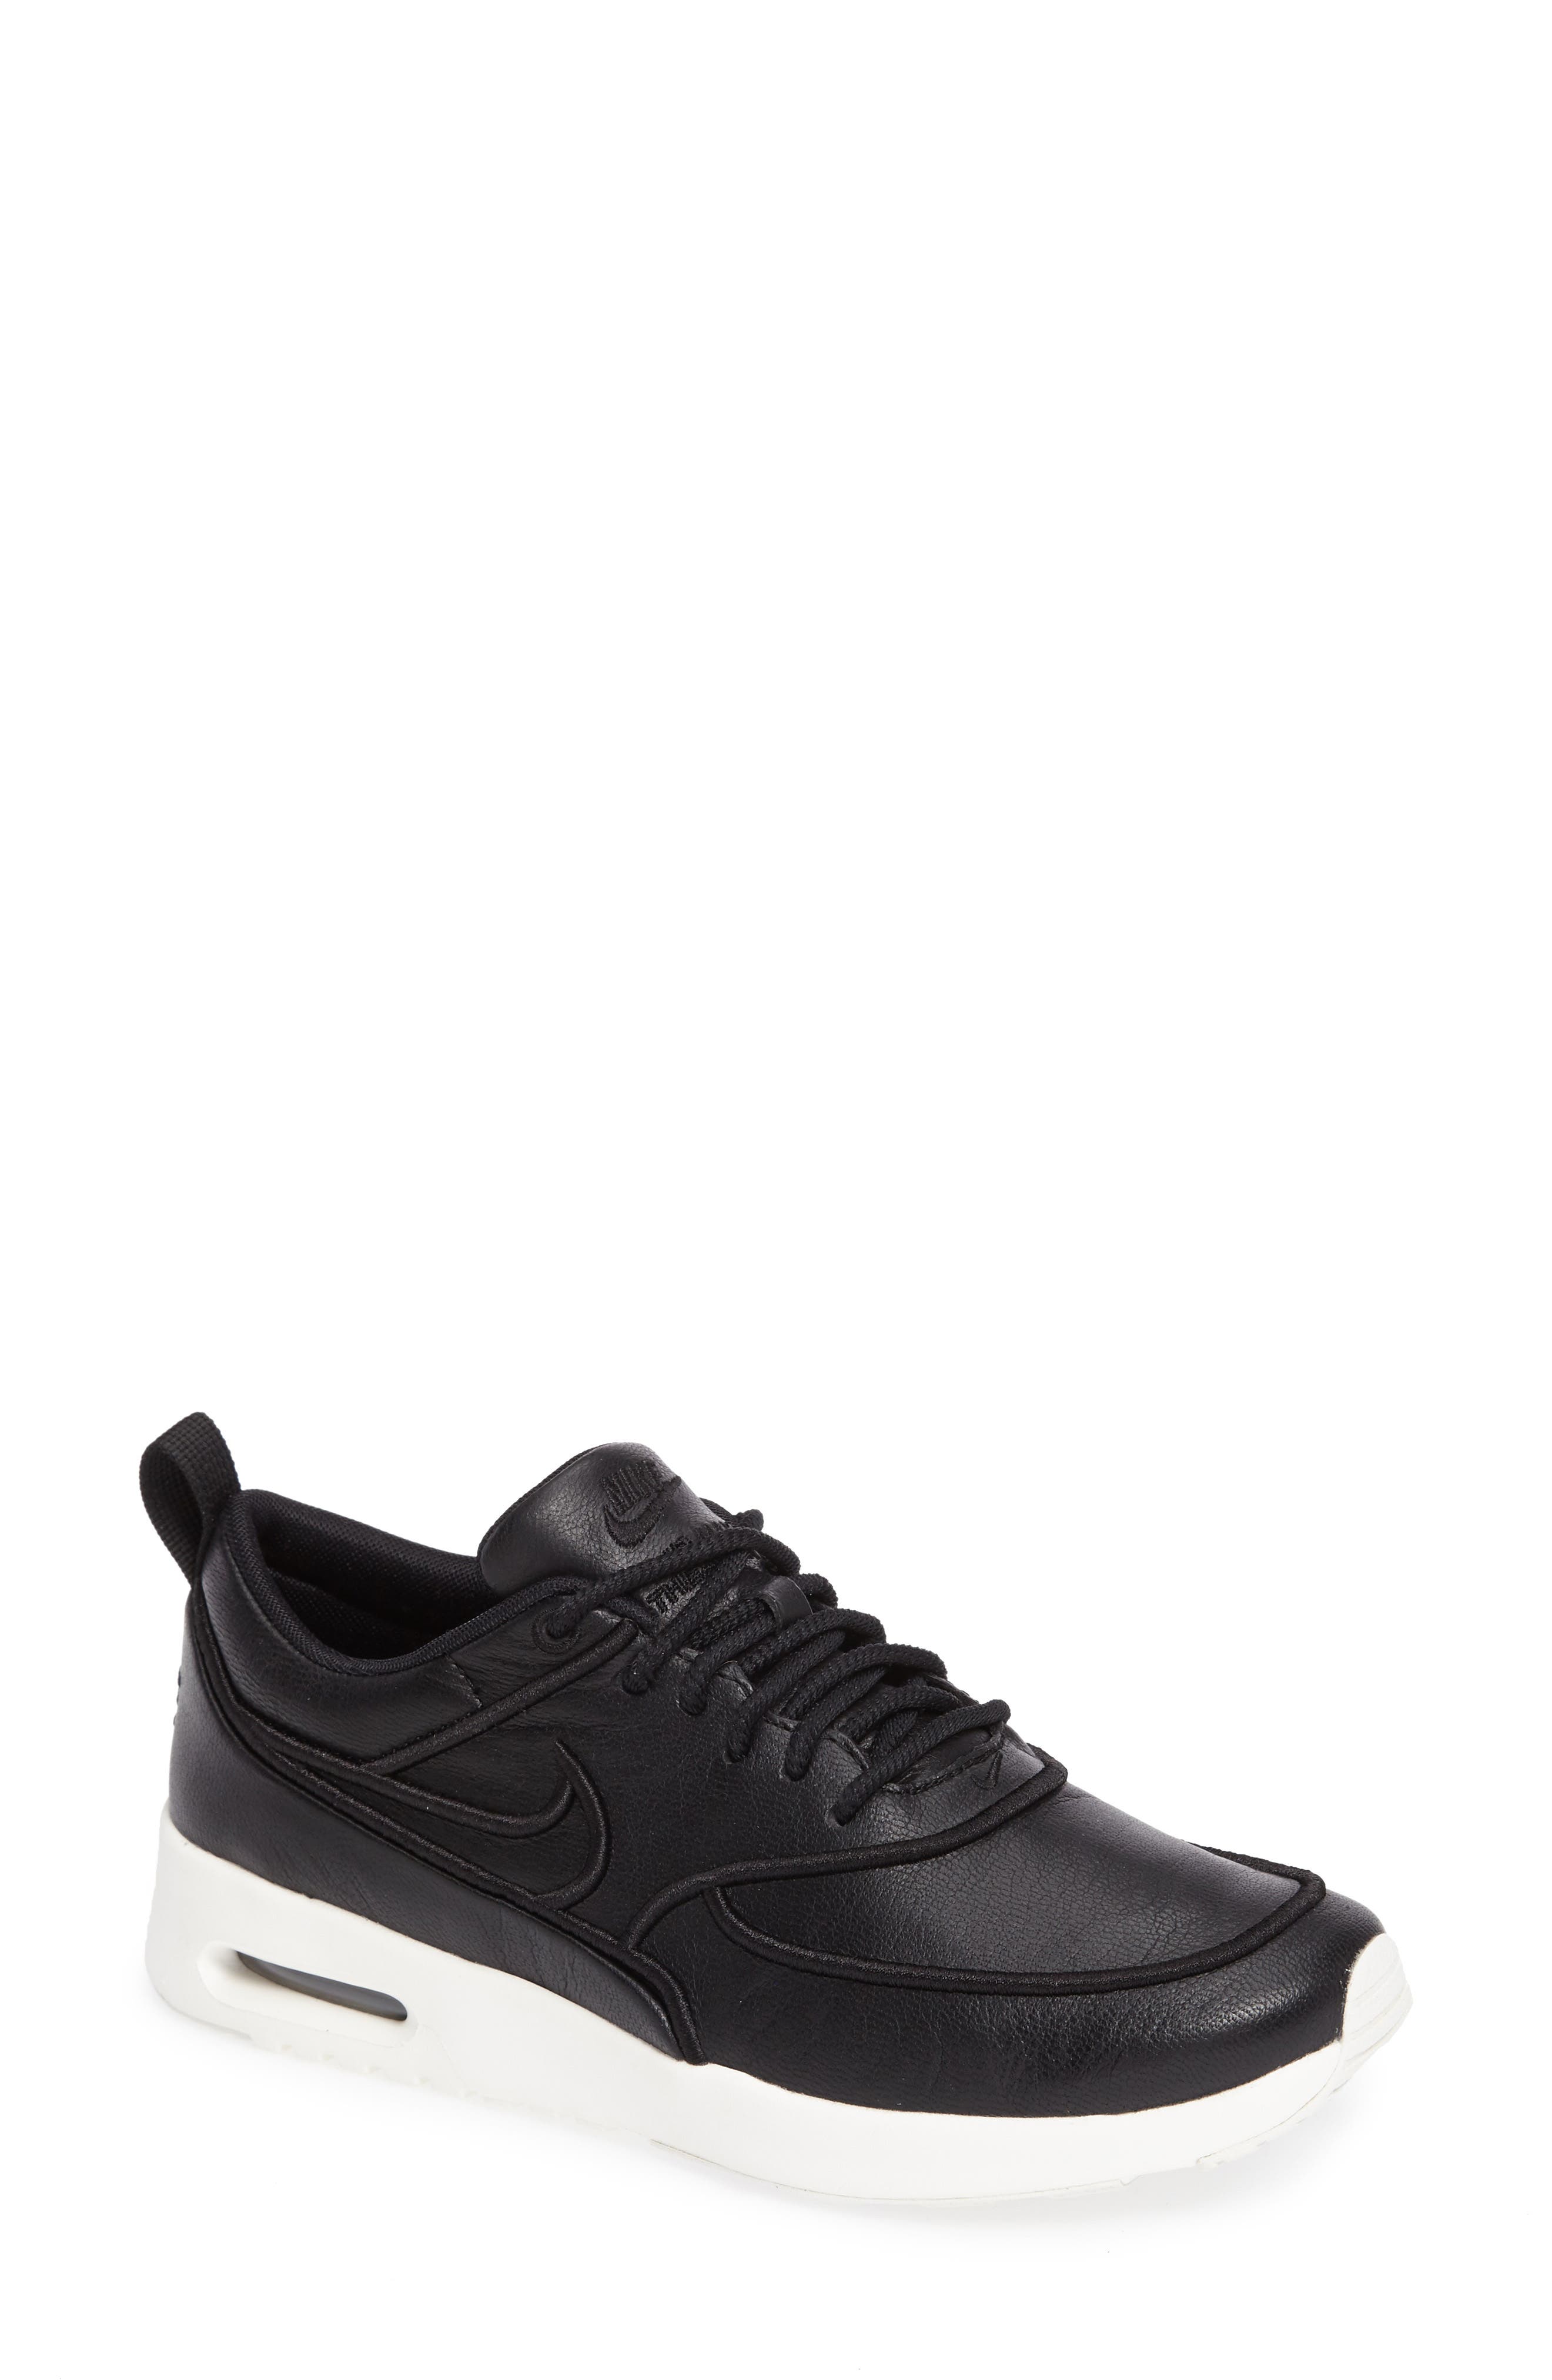 nike thea nordstrom